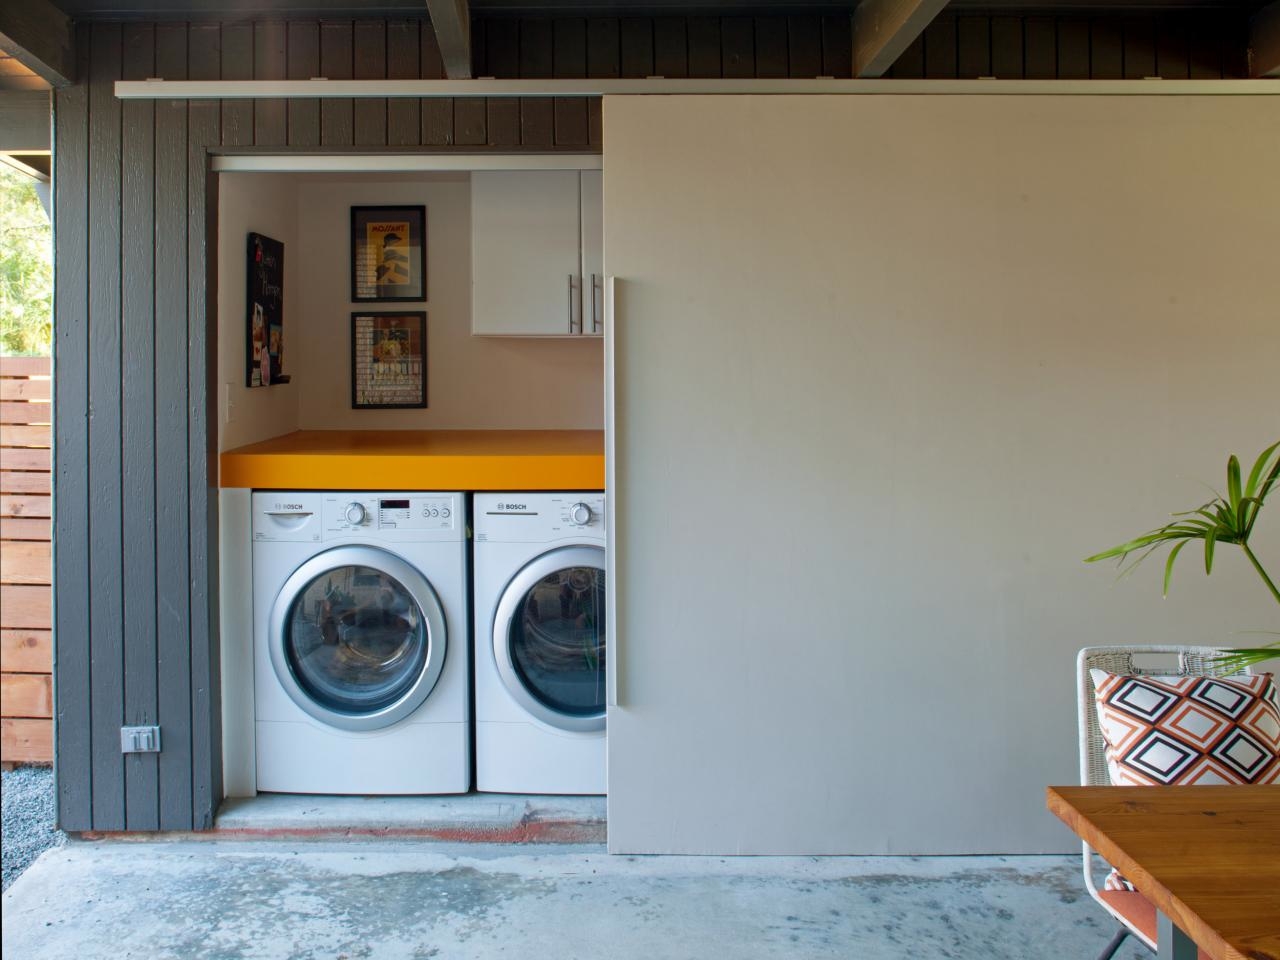 Laundry Room Cabinets With Sliding Doors